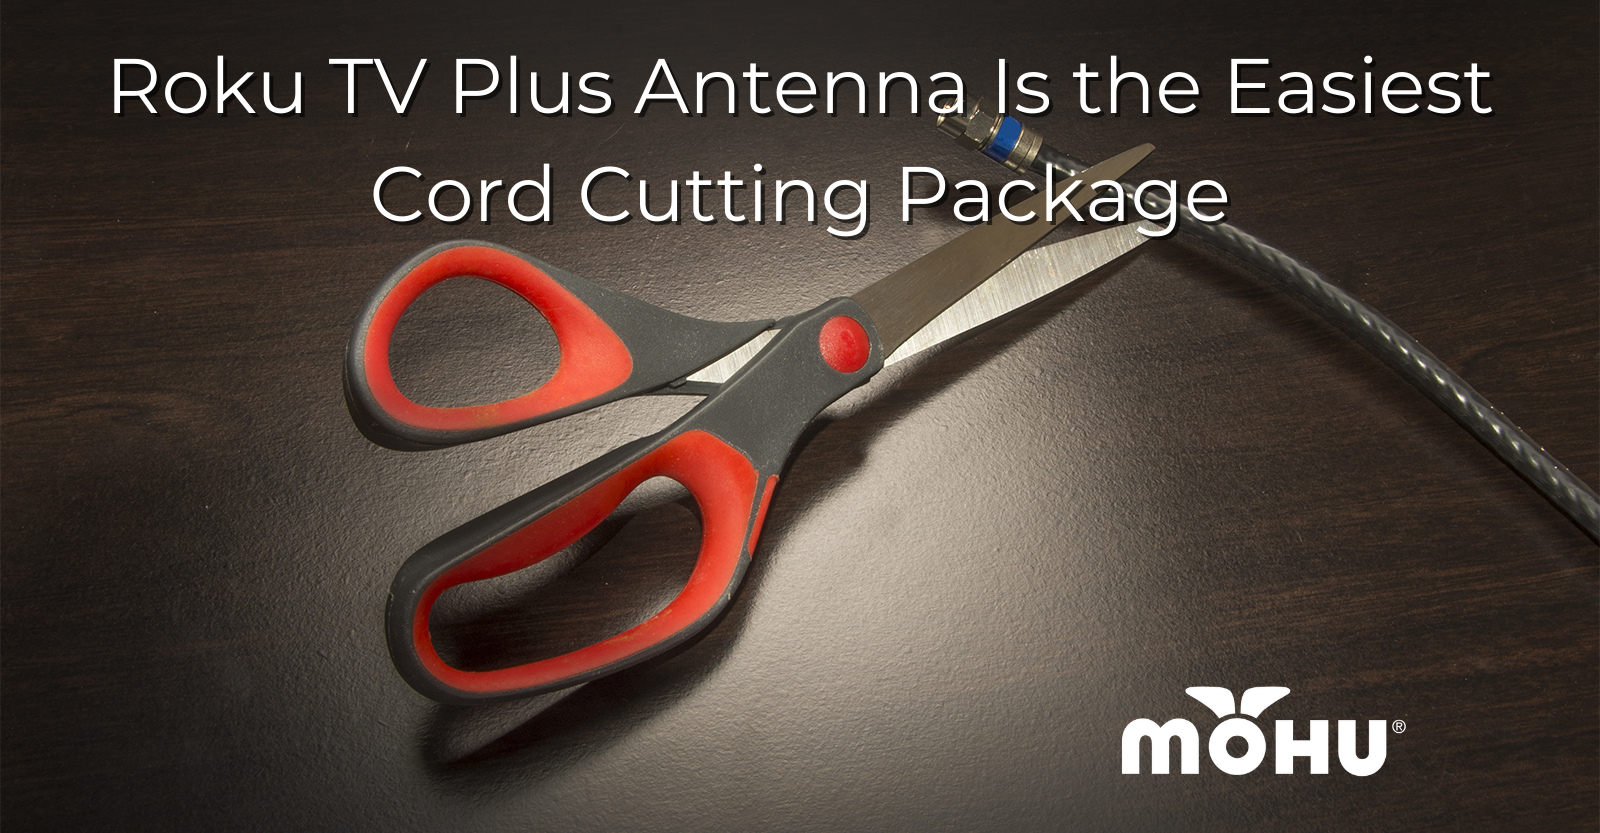 Roku TV Plus Antenna Is the Easiest Cord Cutting Package scissors on a table cutting a coax cable